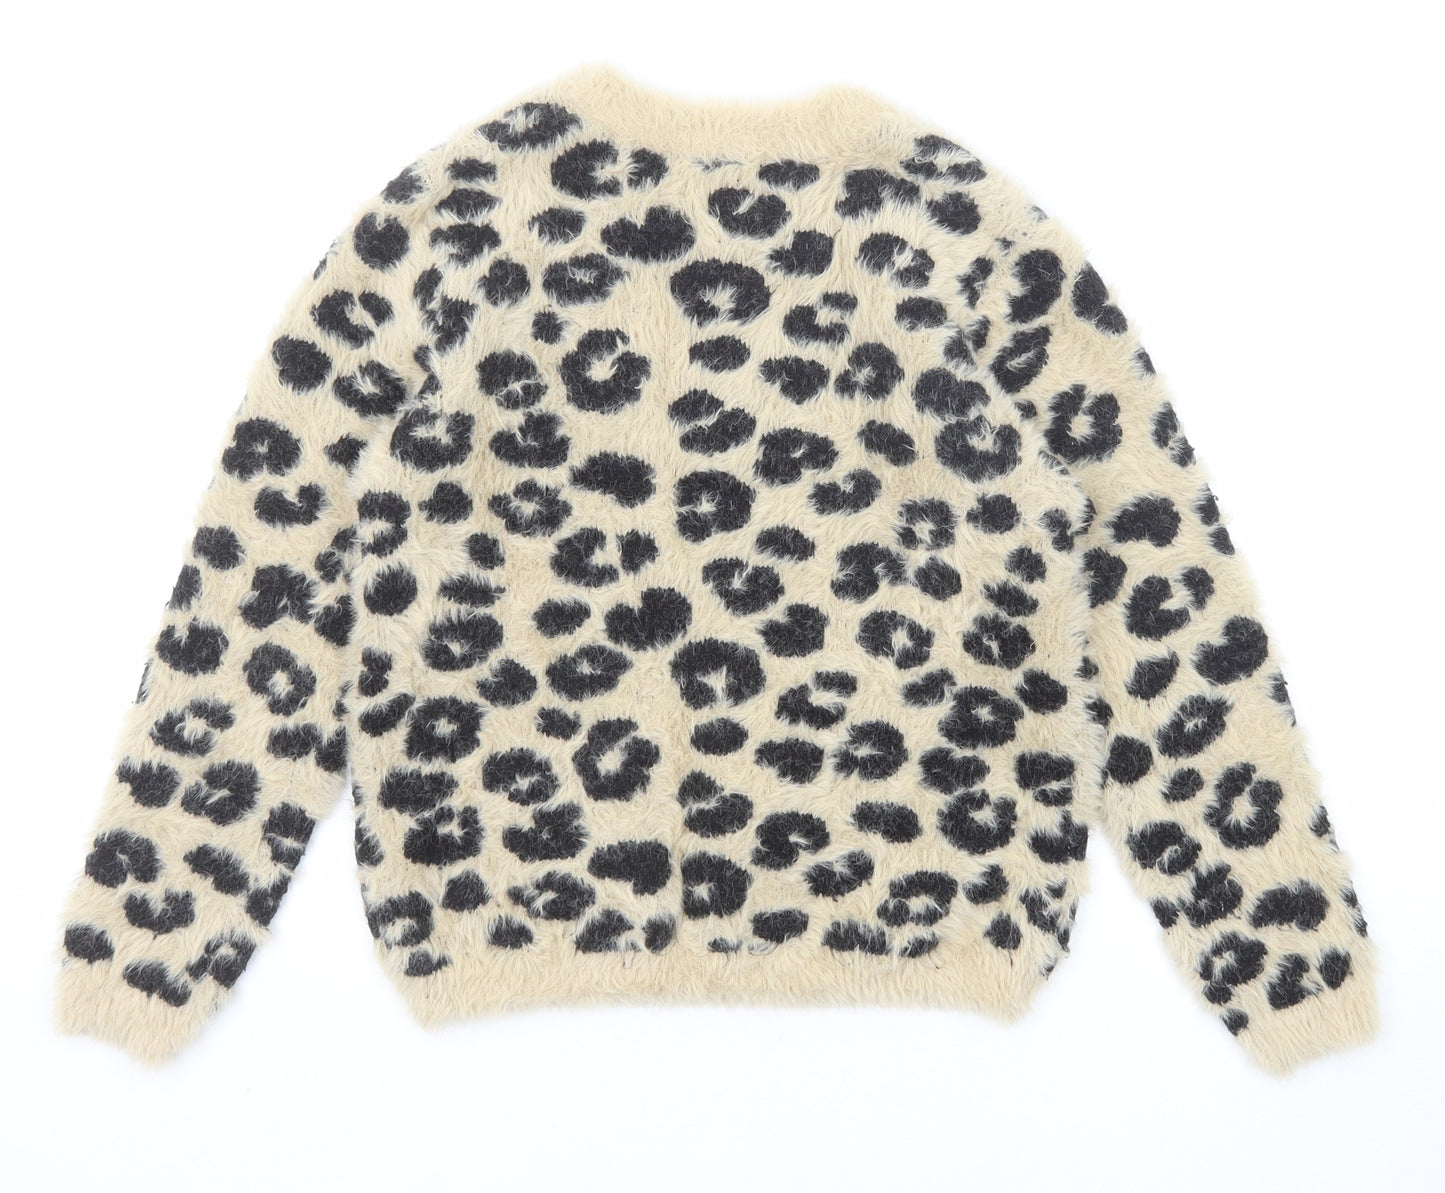 Marks and Spencer Girls Beige Crew Neck Animal Print Acrylic Pullover Jumper Size 11-12 Years Pullover - Leopard Print